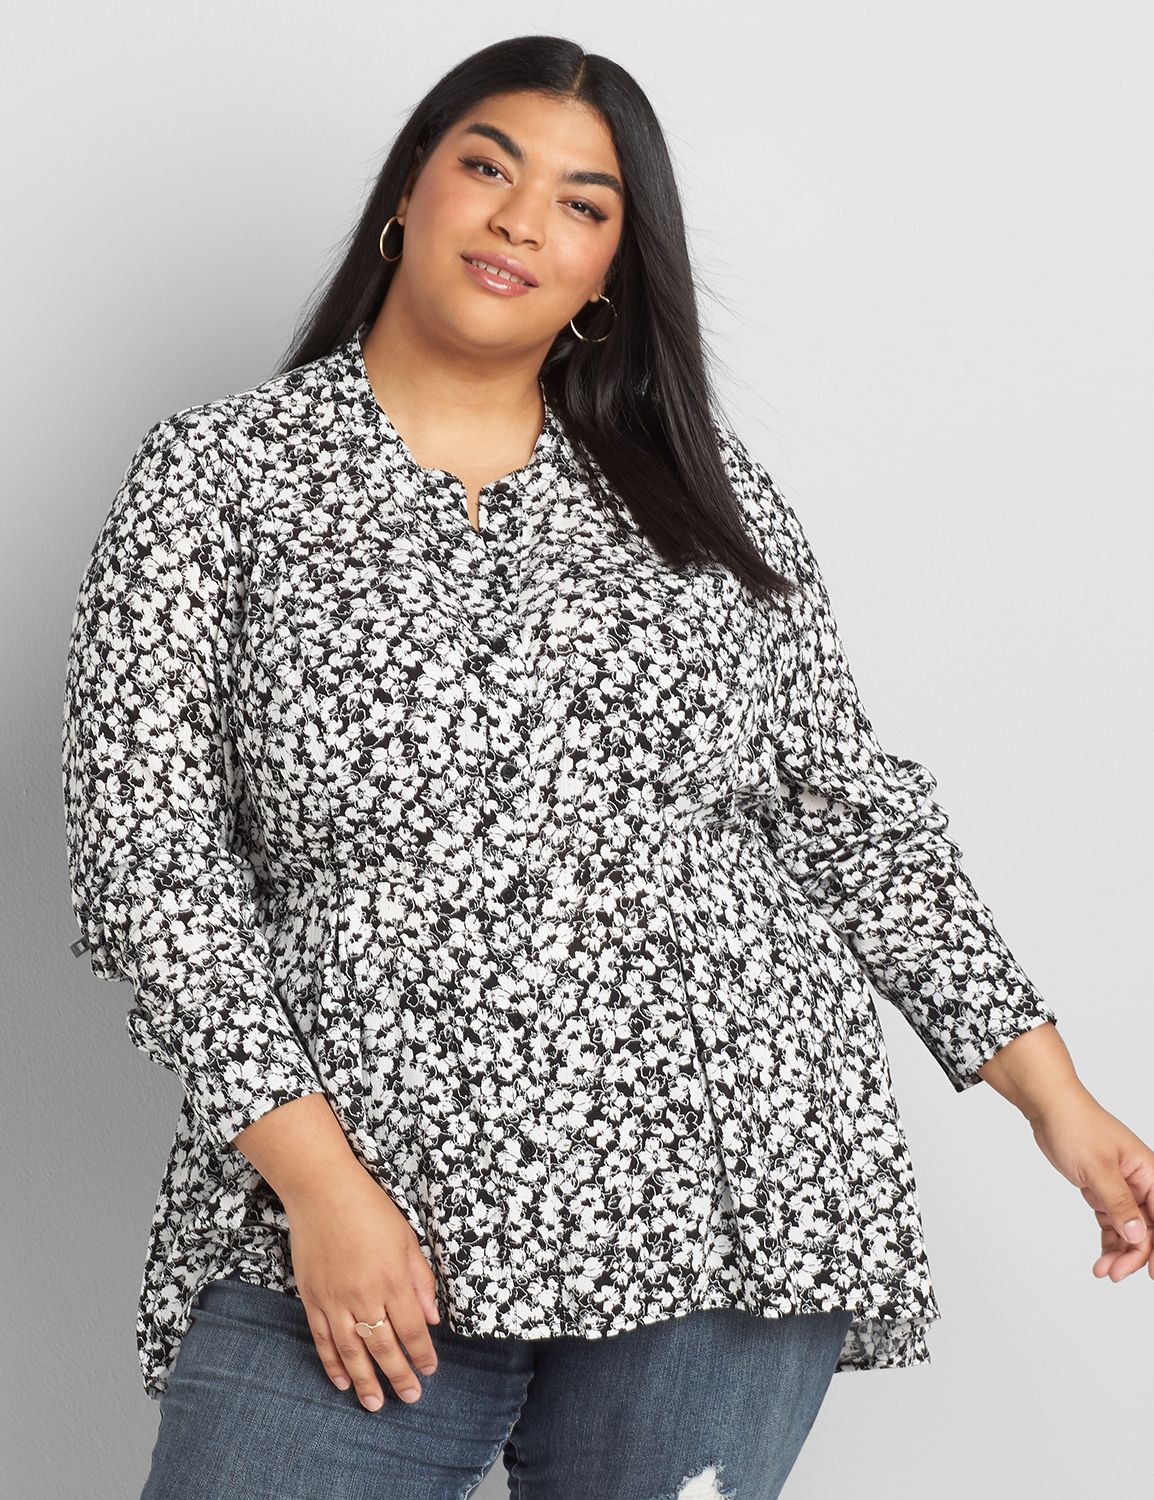  Lane Bryant Women's Printed High-Low Peplum Blouse 26 Black And White Floral